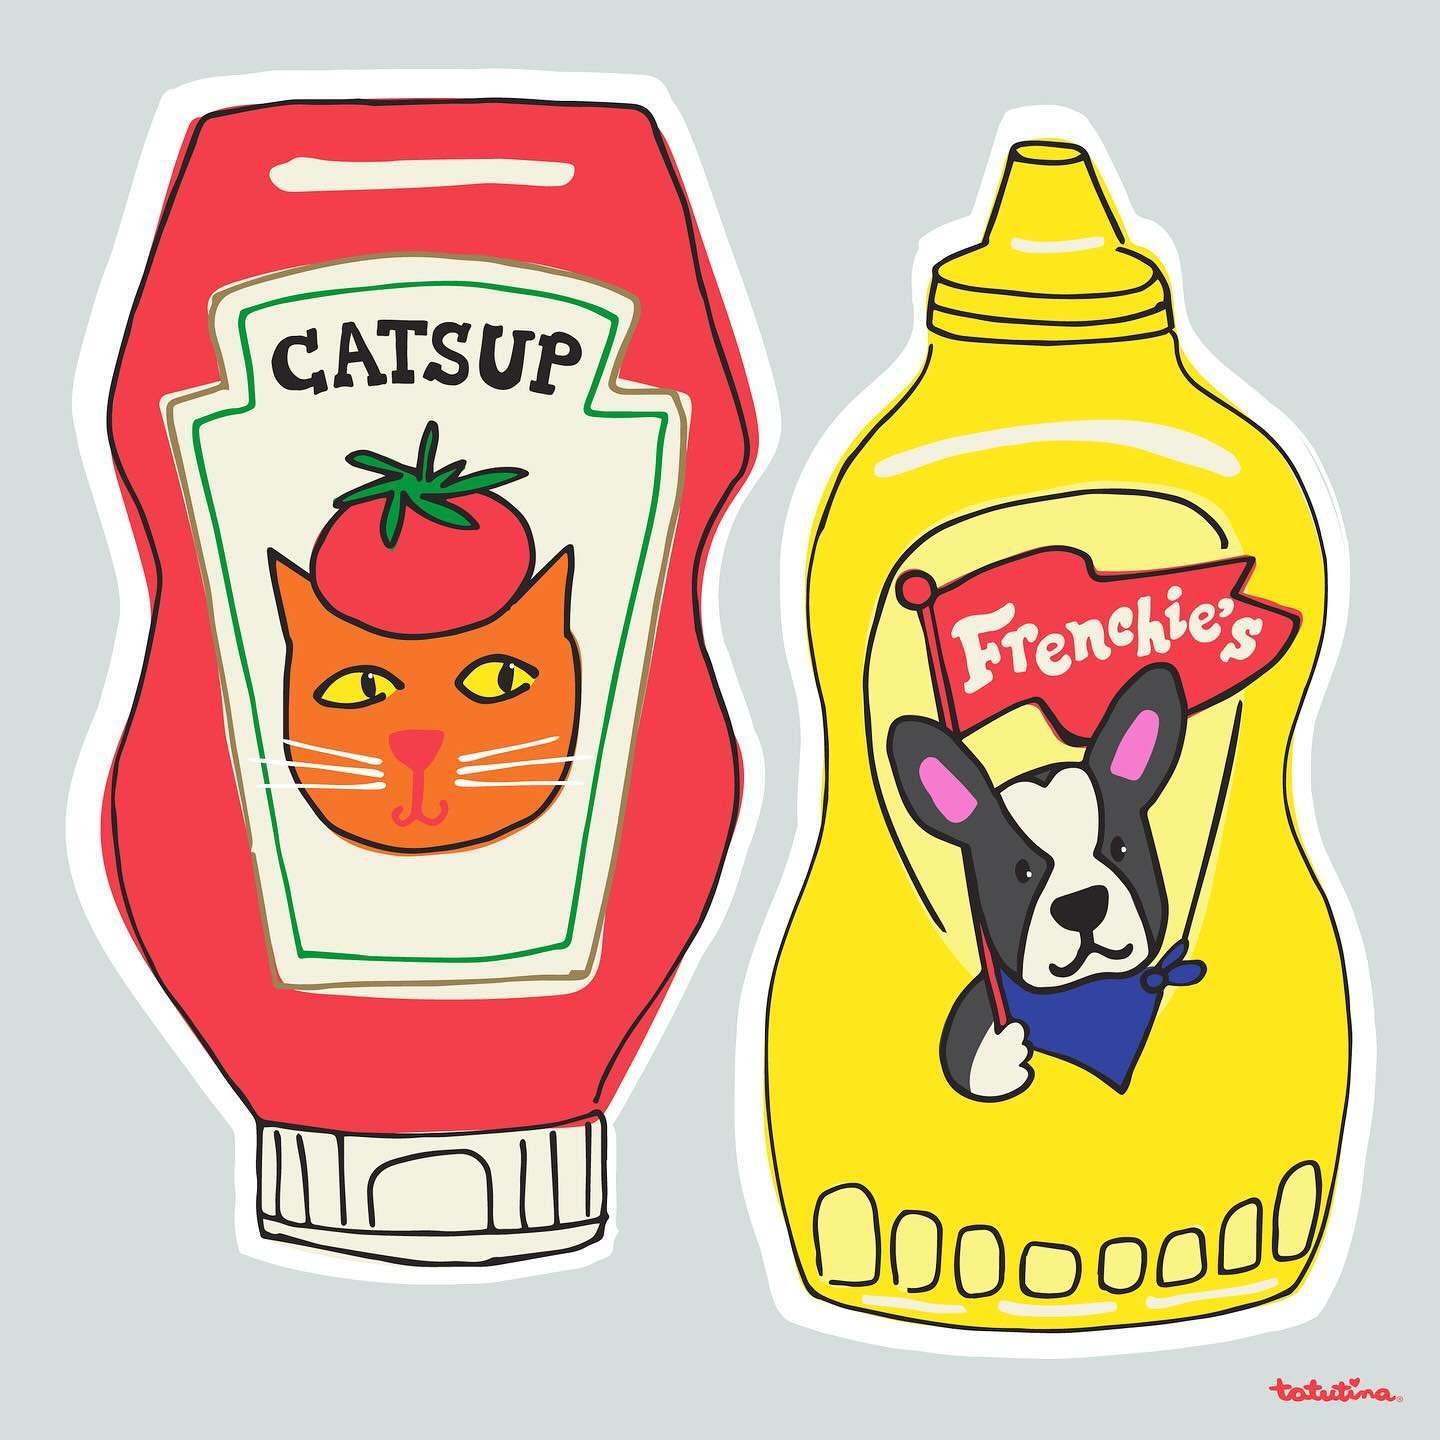 Ketchup Catsup and Frenchie&rsquo;s Mutt-stard. A little kitchen art for your Friday - from my submission to @theydrawandcook &amp; @uppercasemagazine 
#ketchupandmustard #kitchenart #ketchupbottle #mustardyellow #tatutina